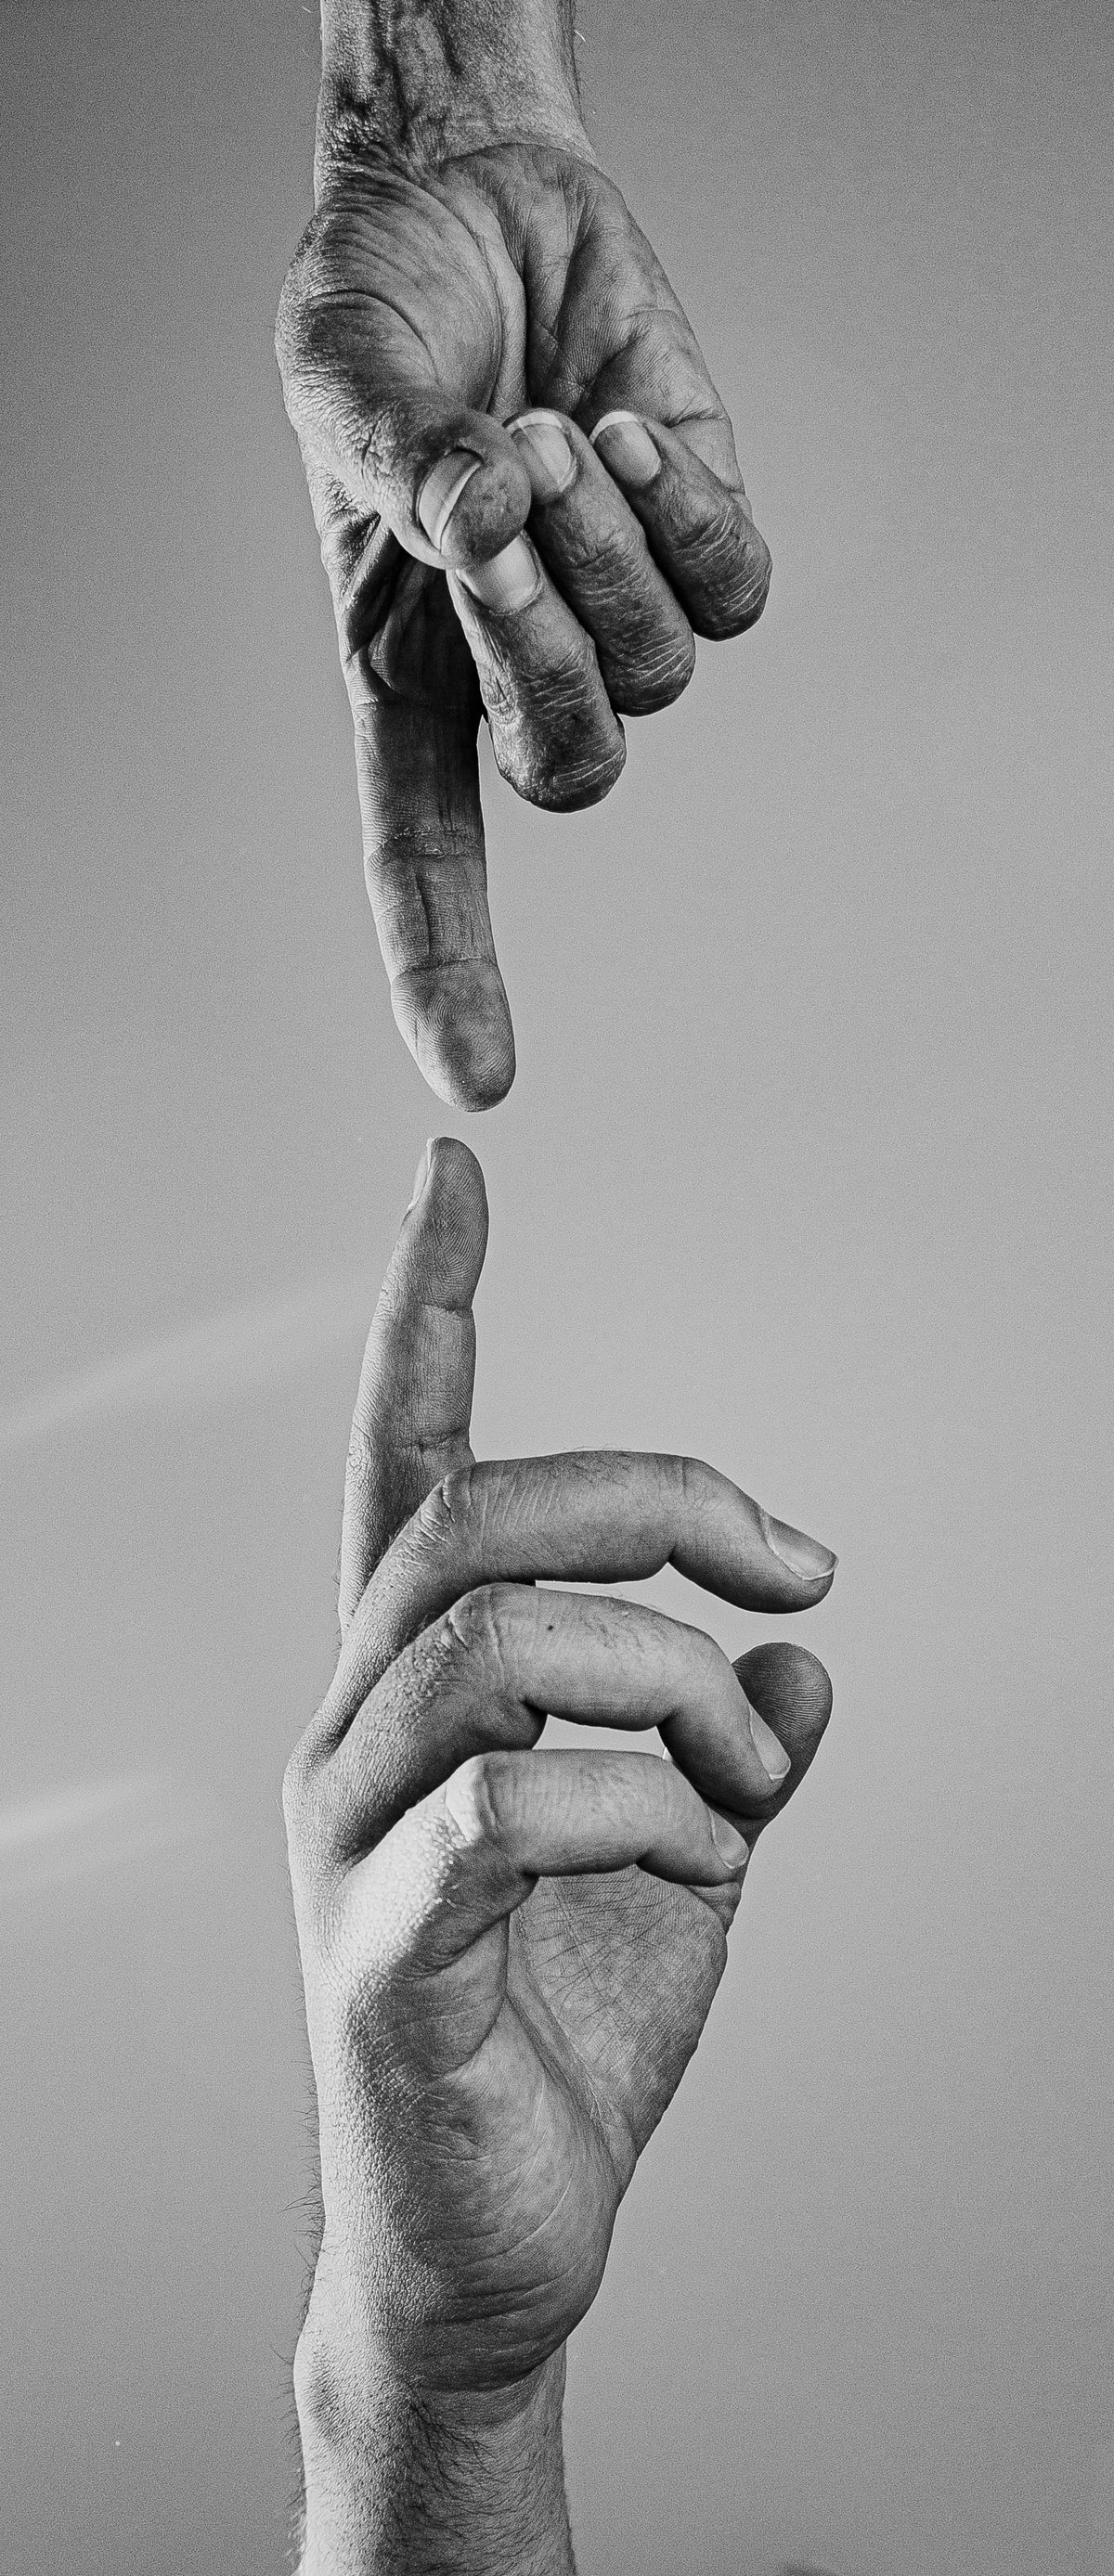 two reaching hands in black and white